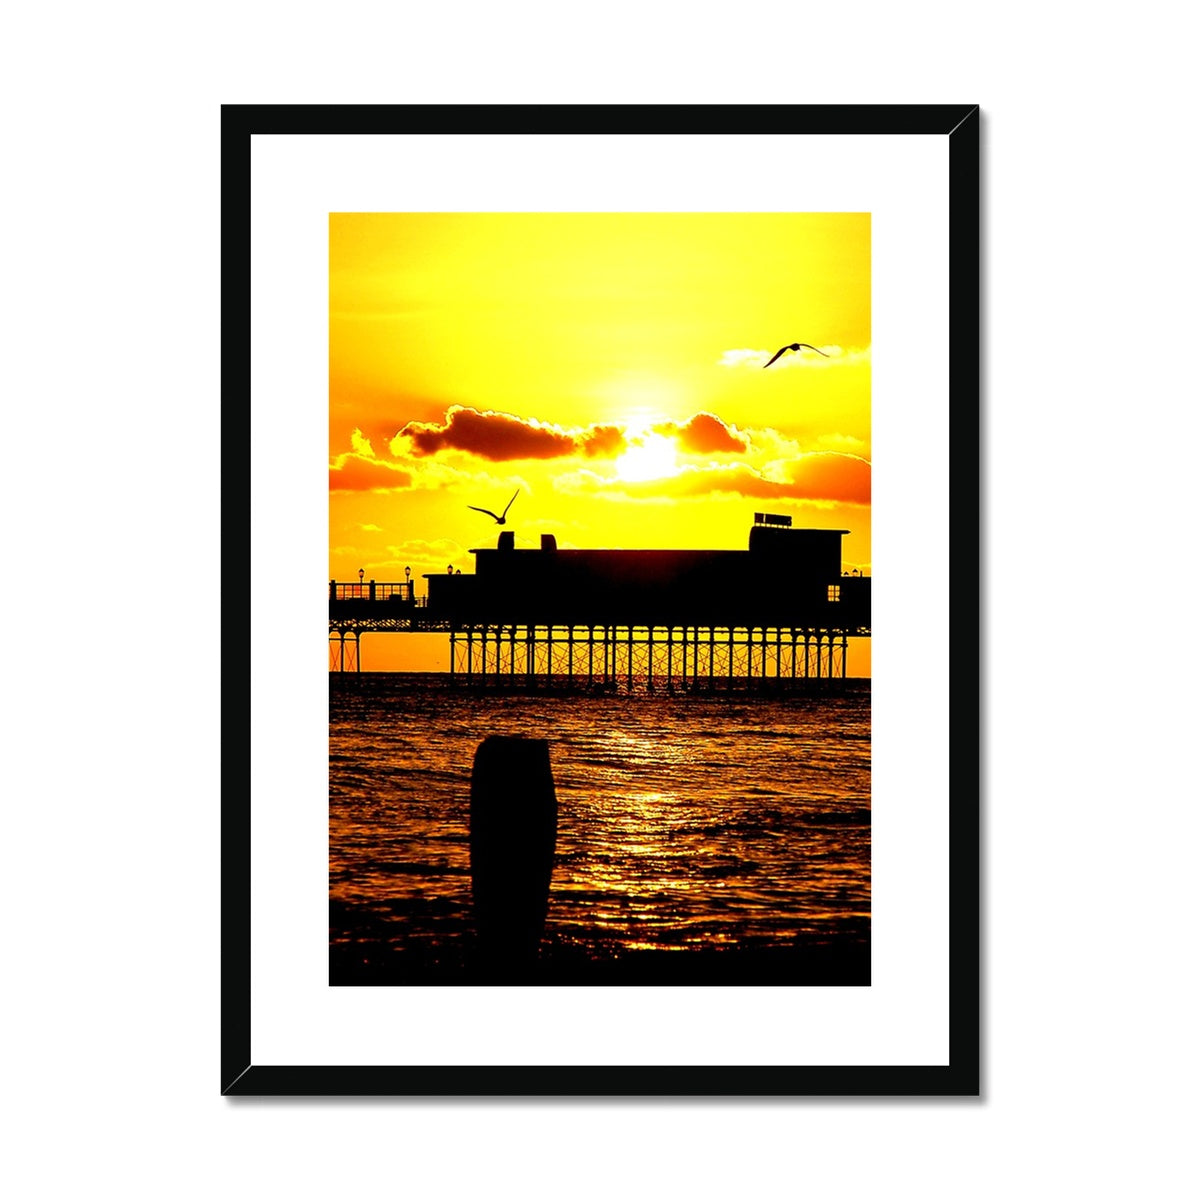 Worthing Pier Perfect Sunset by David Sawyer Framed & Mounted Print